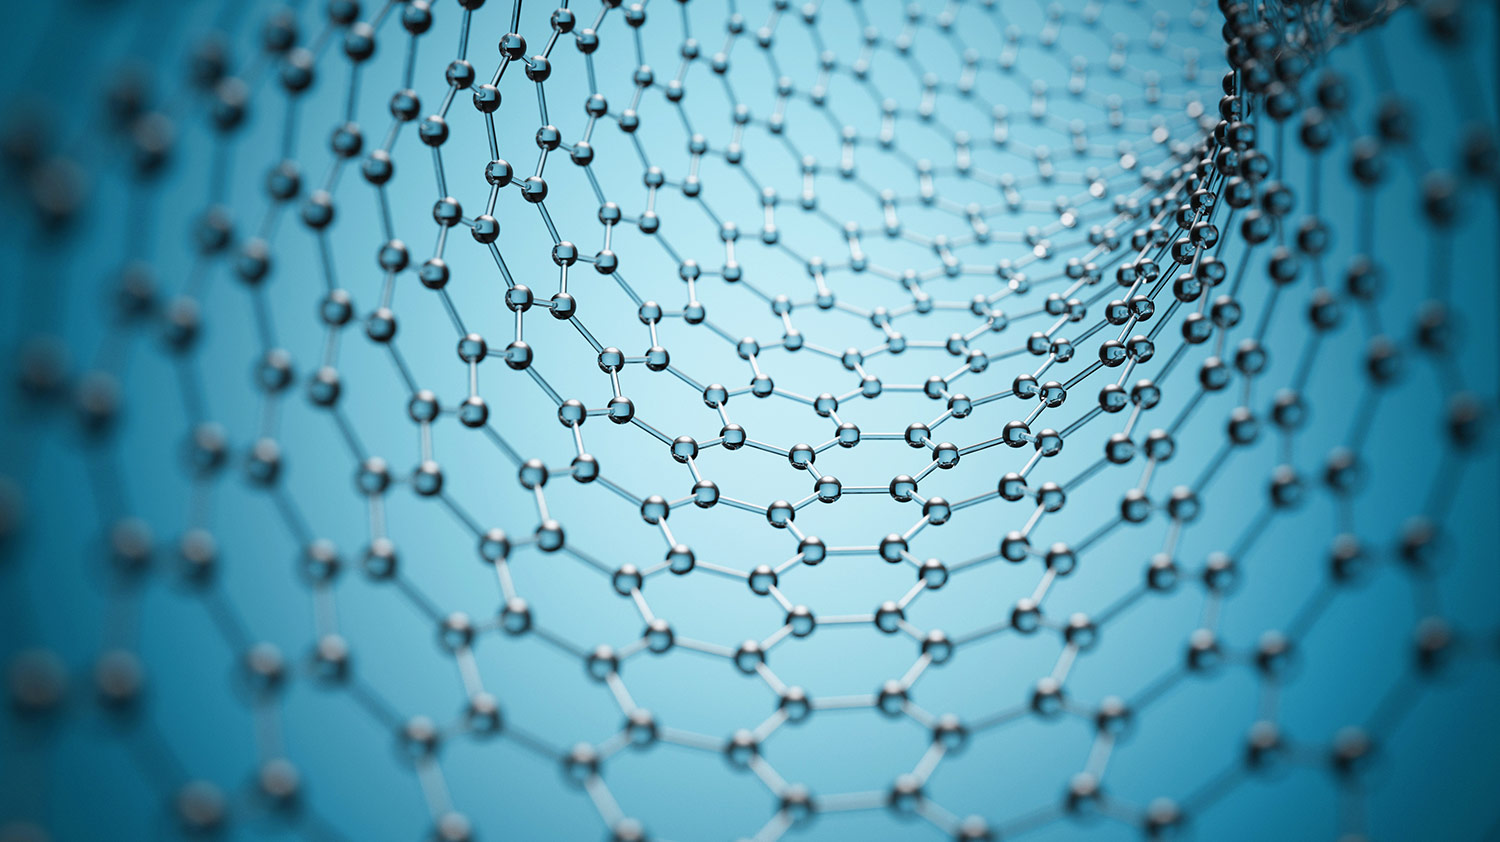 3-D rendering of graphene atomic structure.